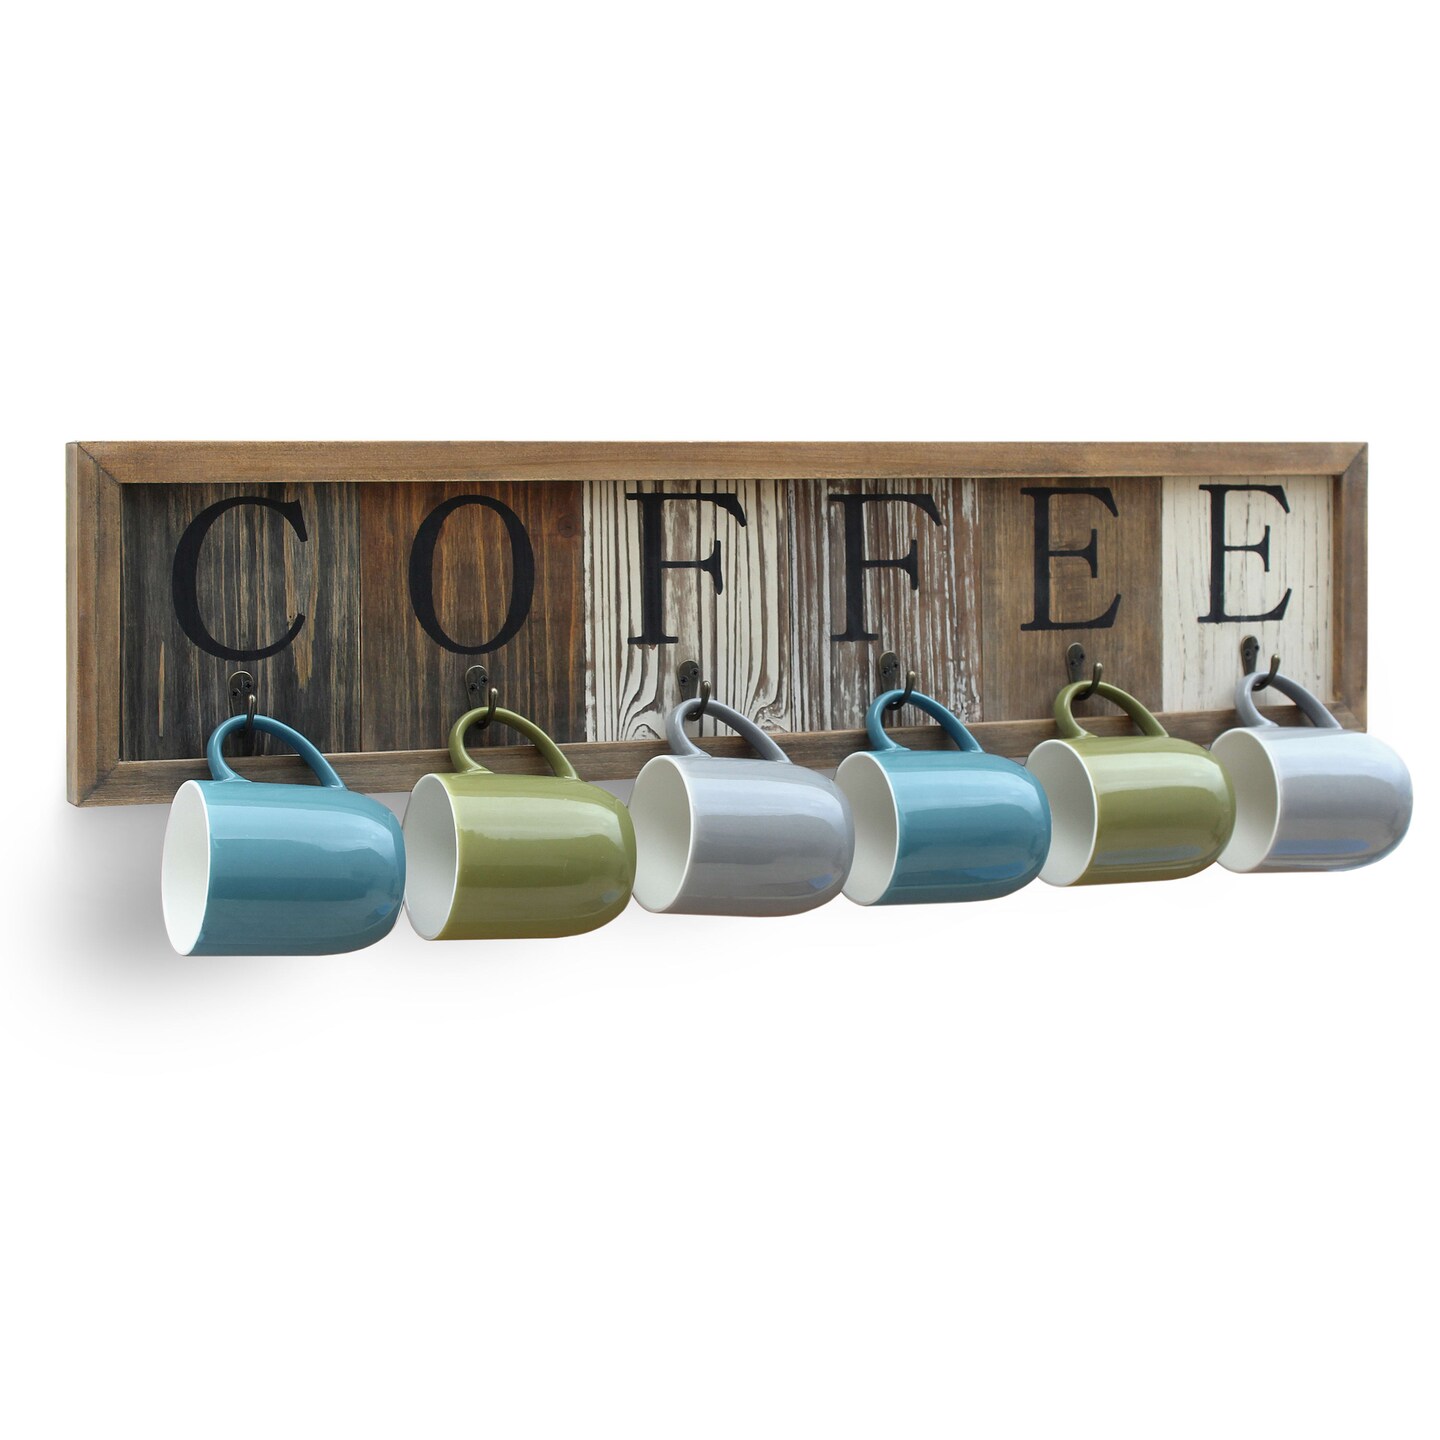 HBCY Creations Rustic Coffee Mug Rack Wall Mounted, Printed Coffee Sign - 6 Coffee Cup Hooks - Wooden Coffee Mug Organizer - Distressed Coffee Rack Sign (31.5&#x22;)